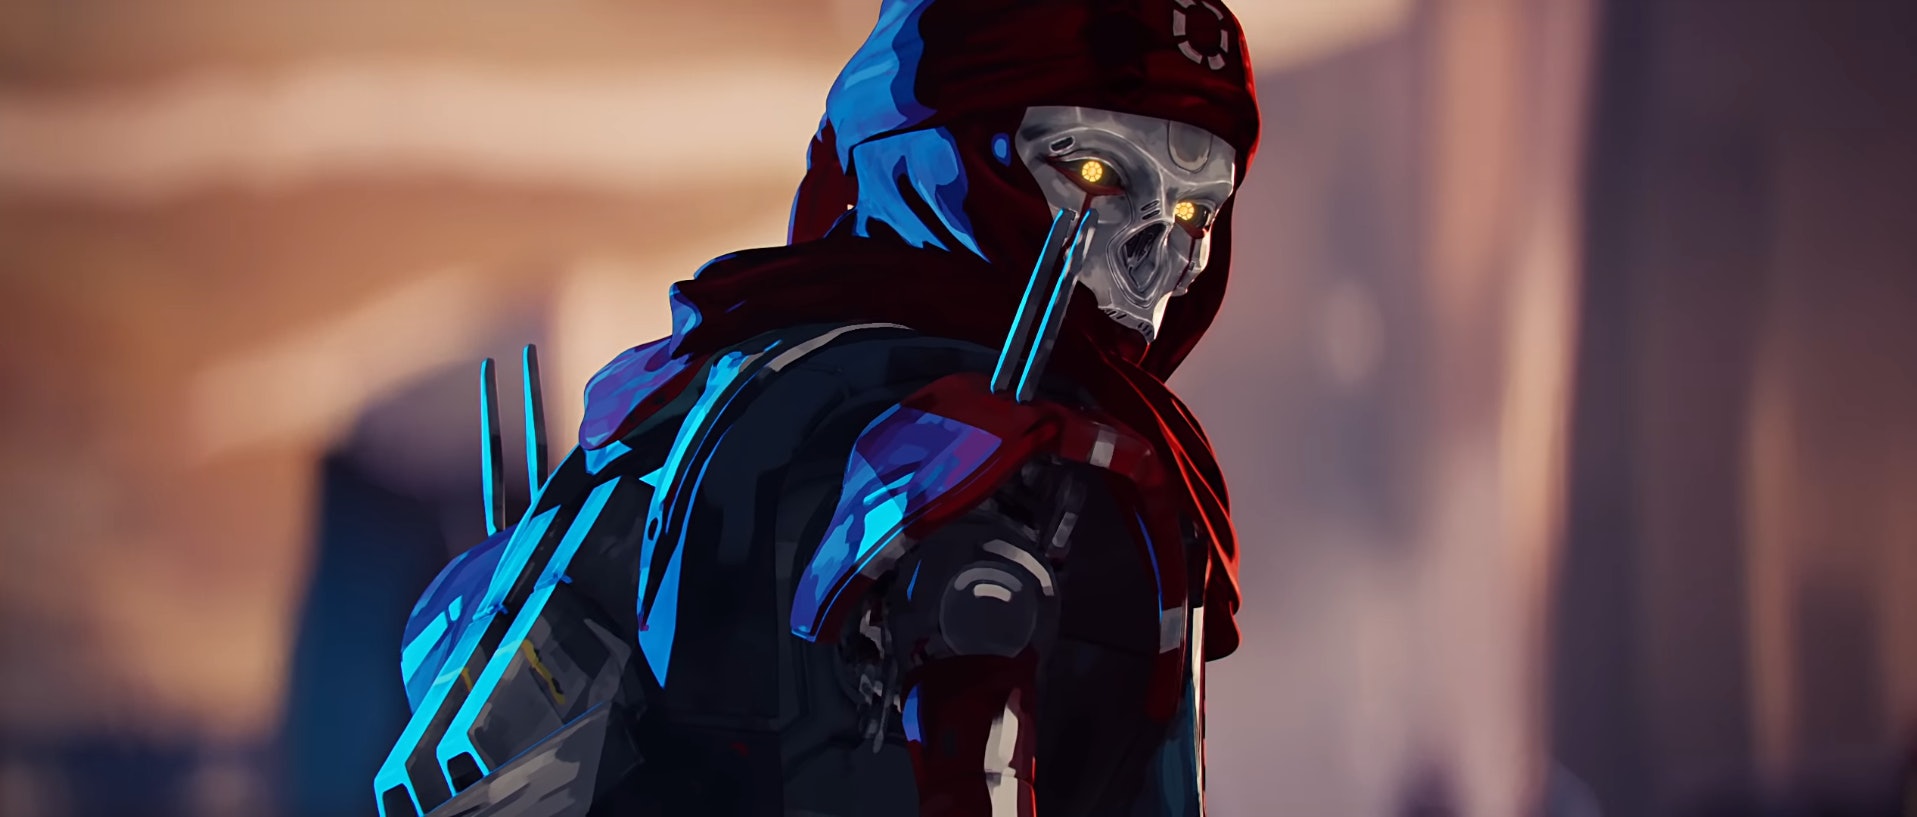 Apex Legends Season 4 Revenant Guide Abilities Backstory Voice Actor And Everything To Know